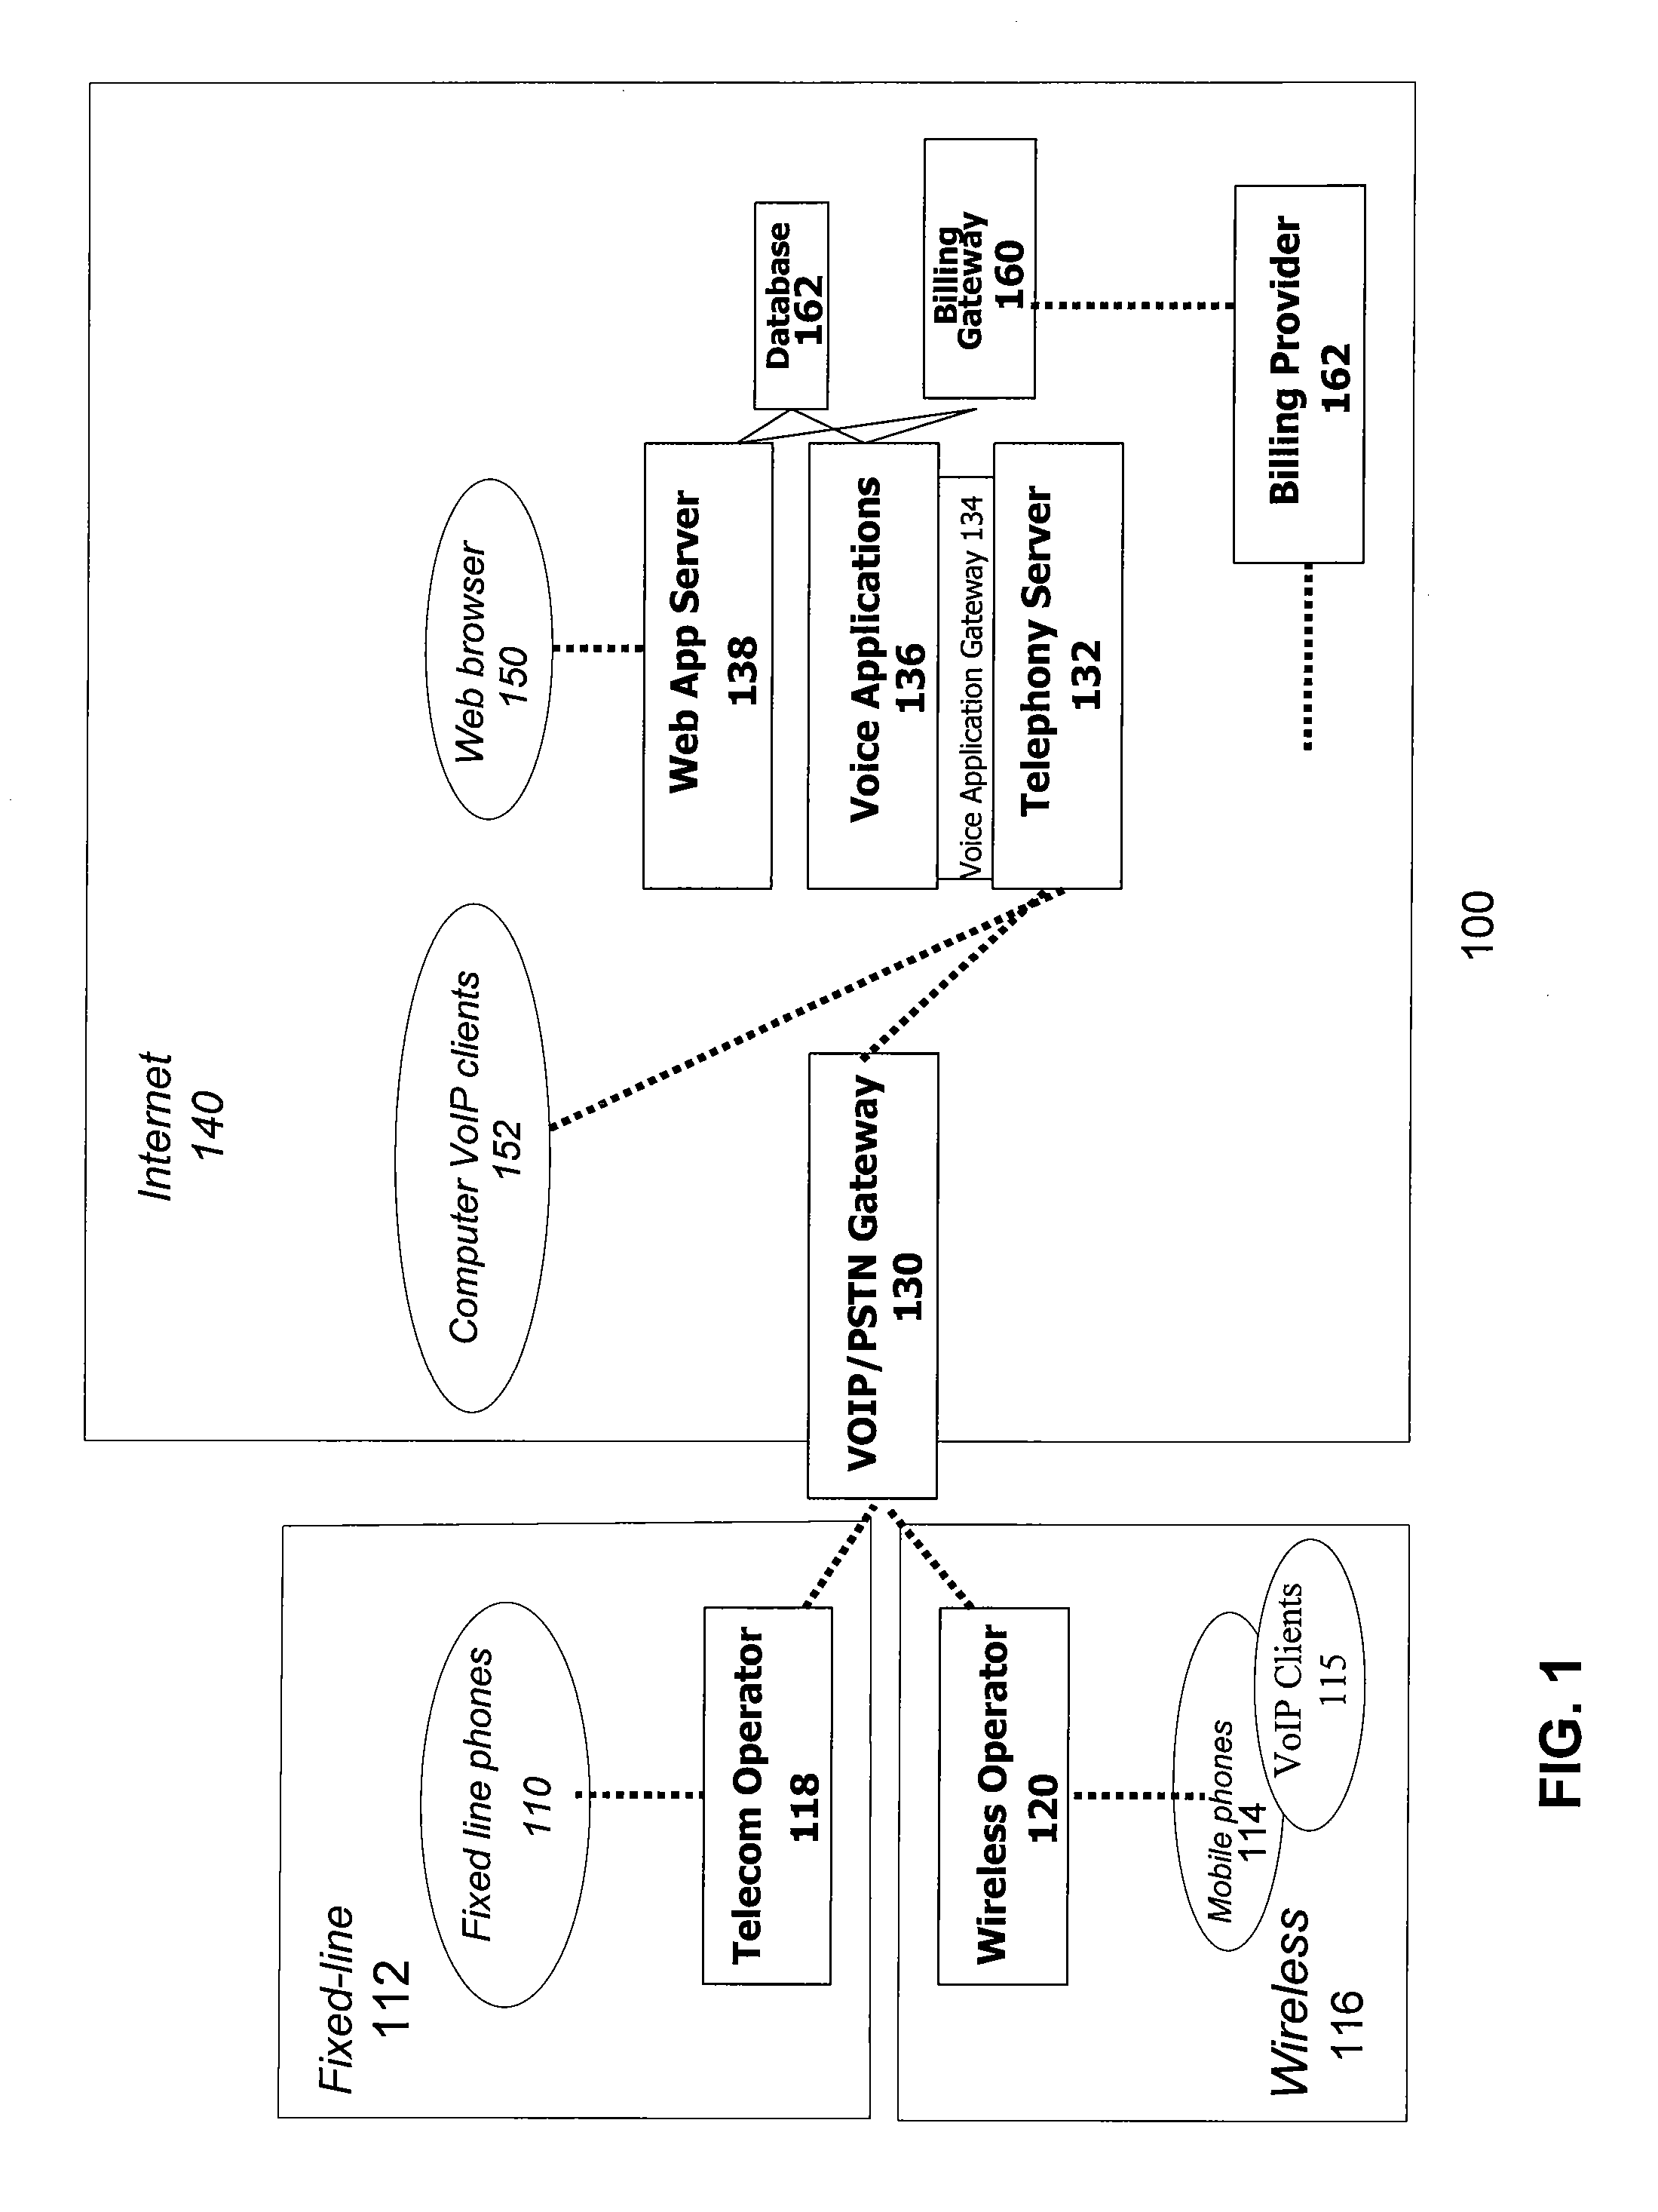 System, apparatus and method for enabling mobility to virtual communities via personal and group forums